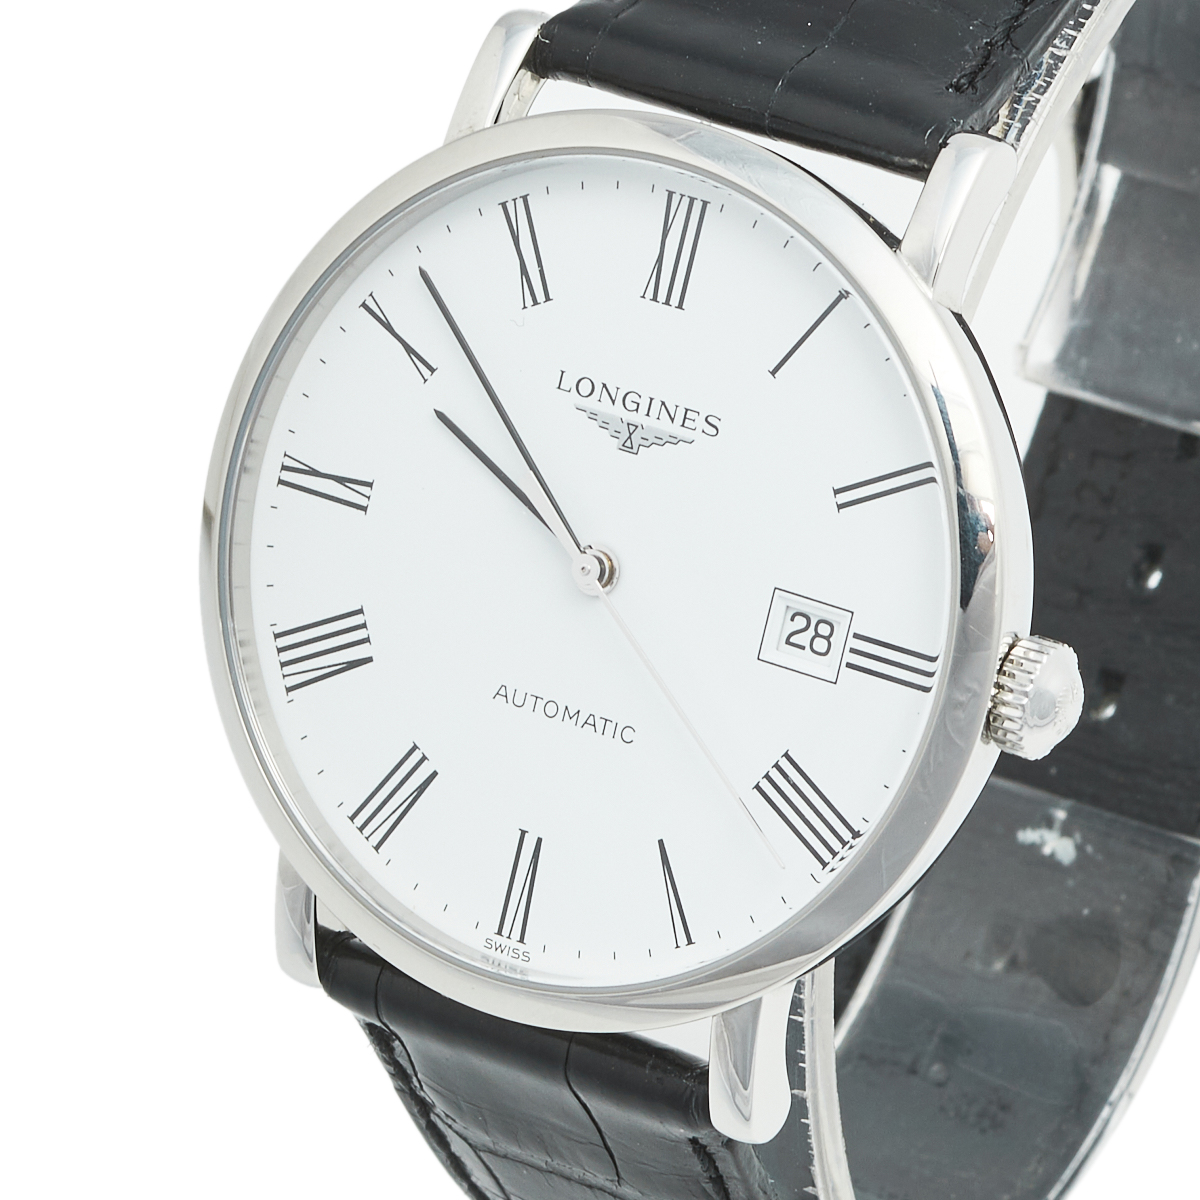 

Longines White Stainless Steel Alligator The Elegant Collection L4.910.4.11.2 Men's Wristwatch